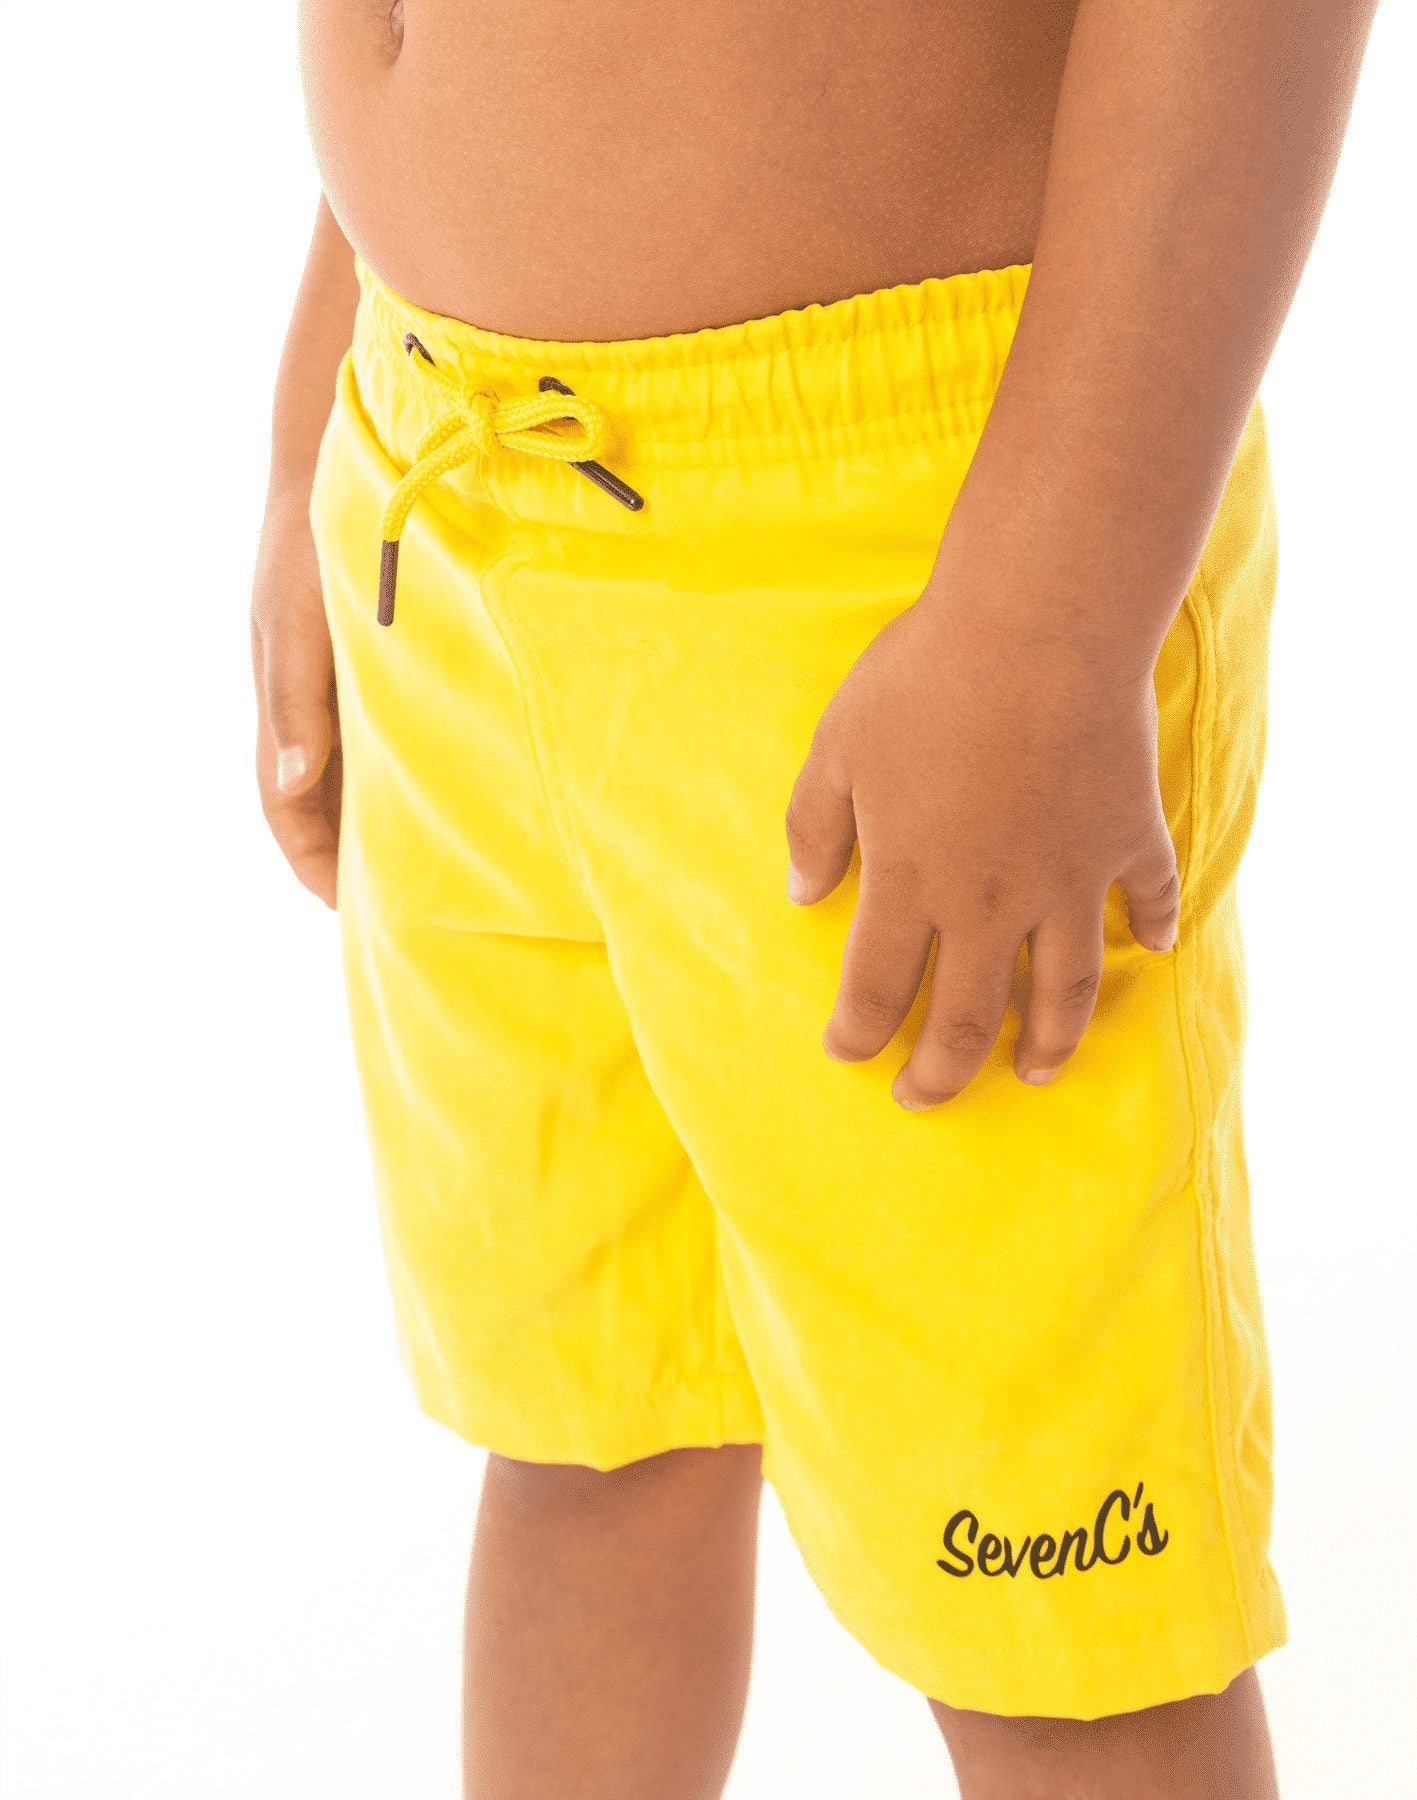 SevenC's Kids' Recycled Polyester Shorts in Yellow - Side View